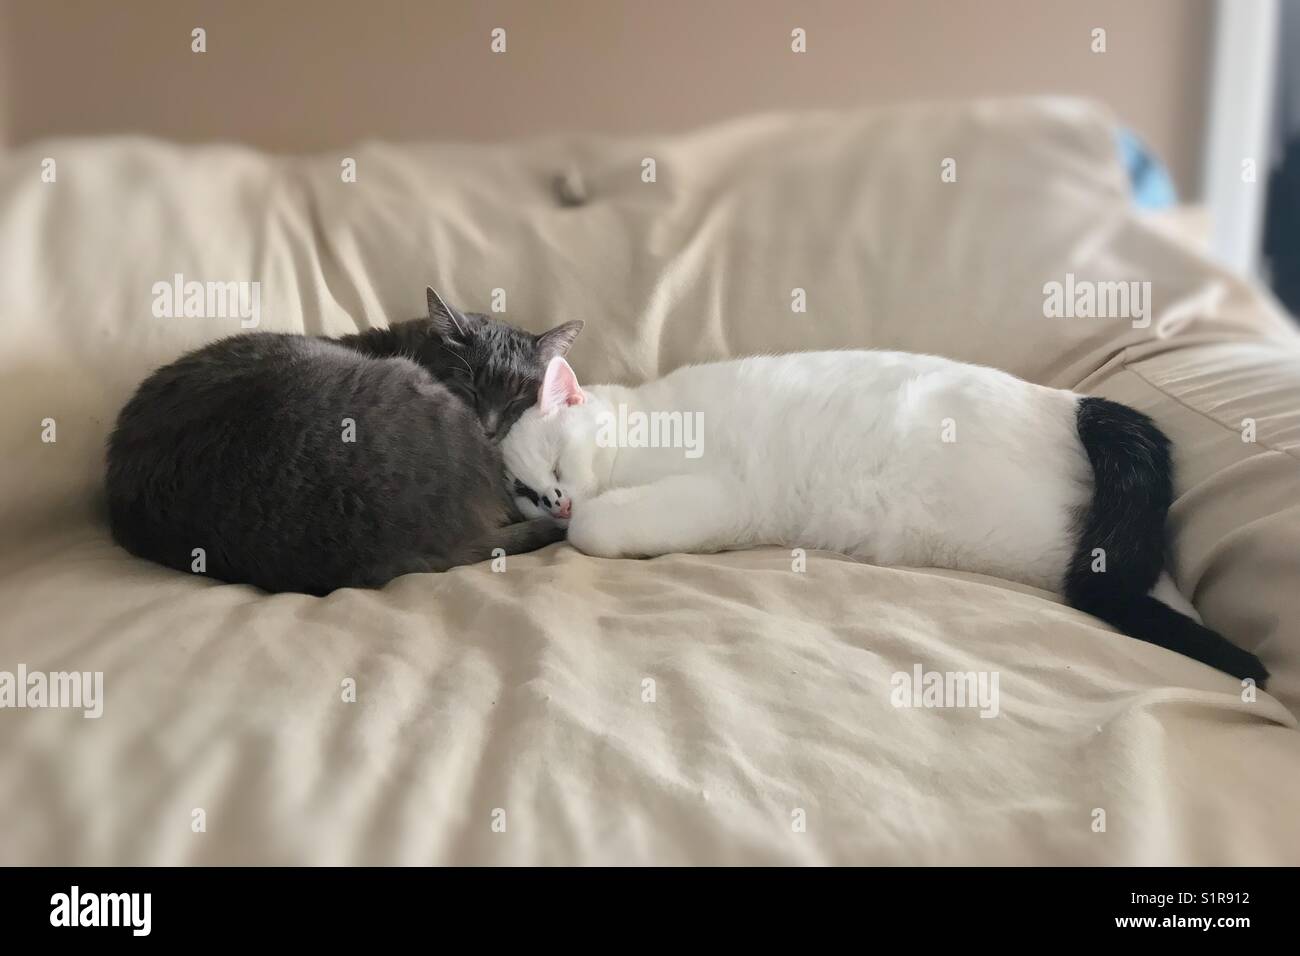 Two cats sleep together. Stock Photo